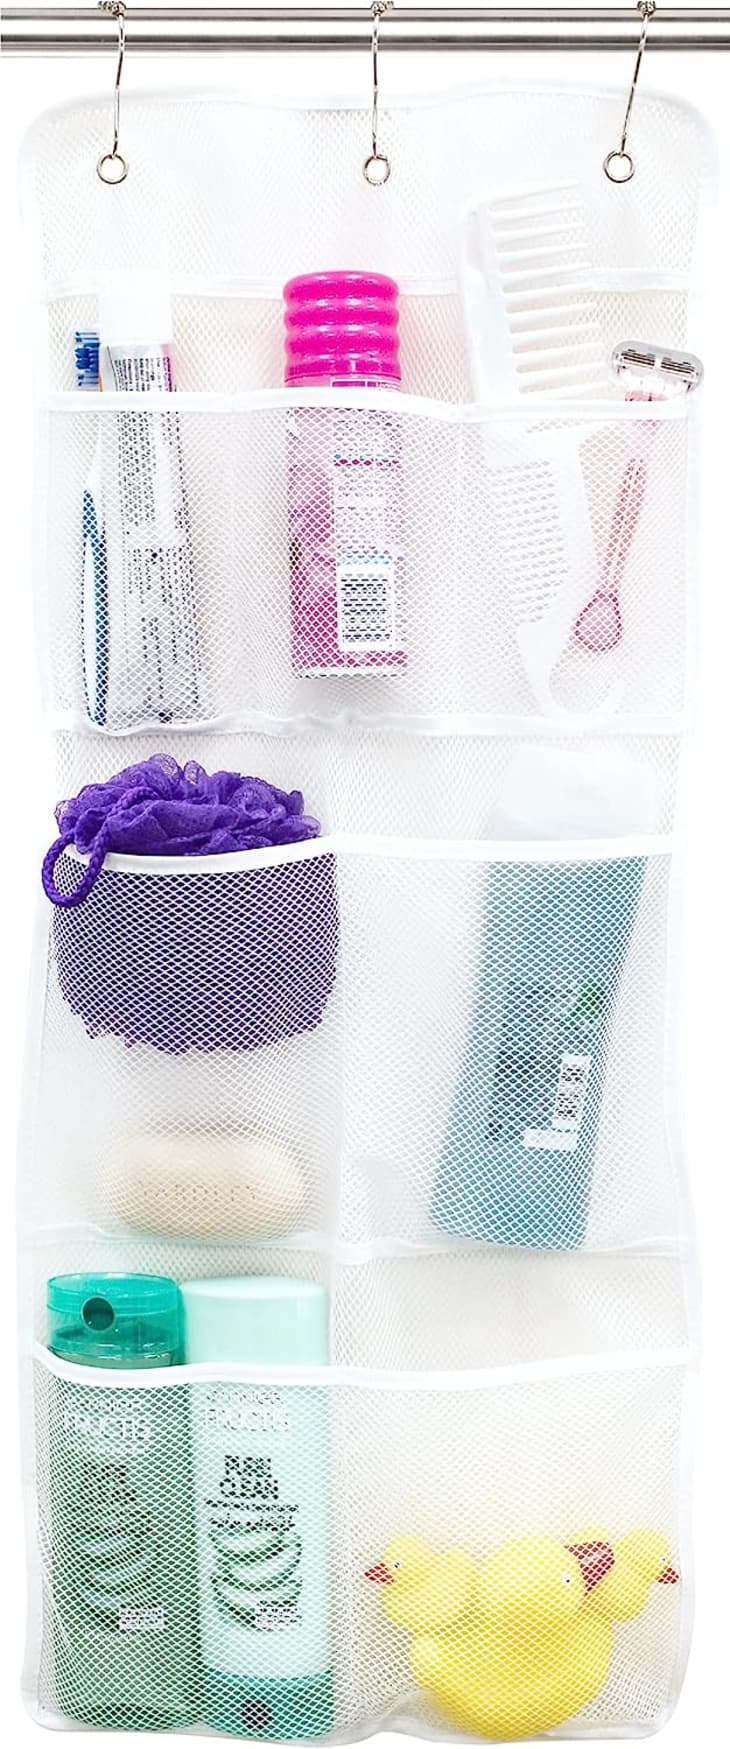 Product Image: S&T INC. Shower Organizer with Quick Drying Mesh